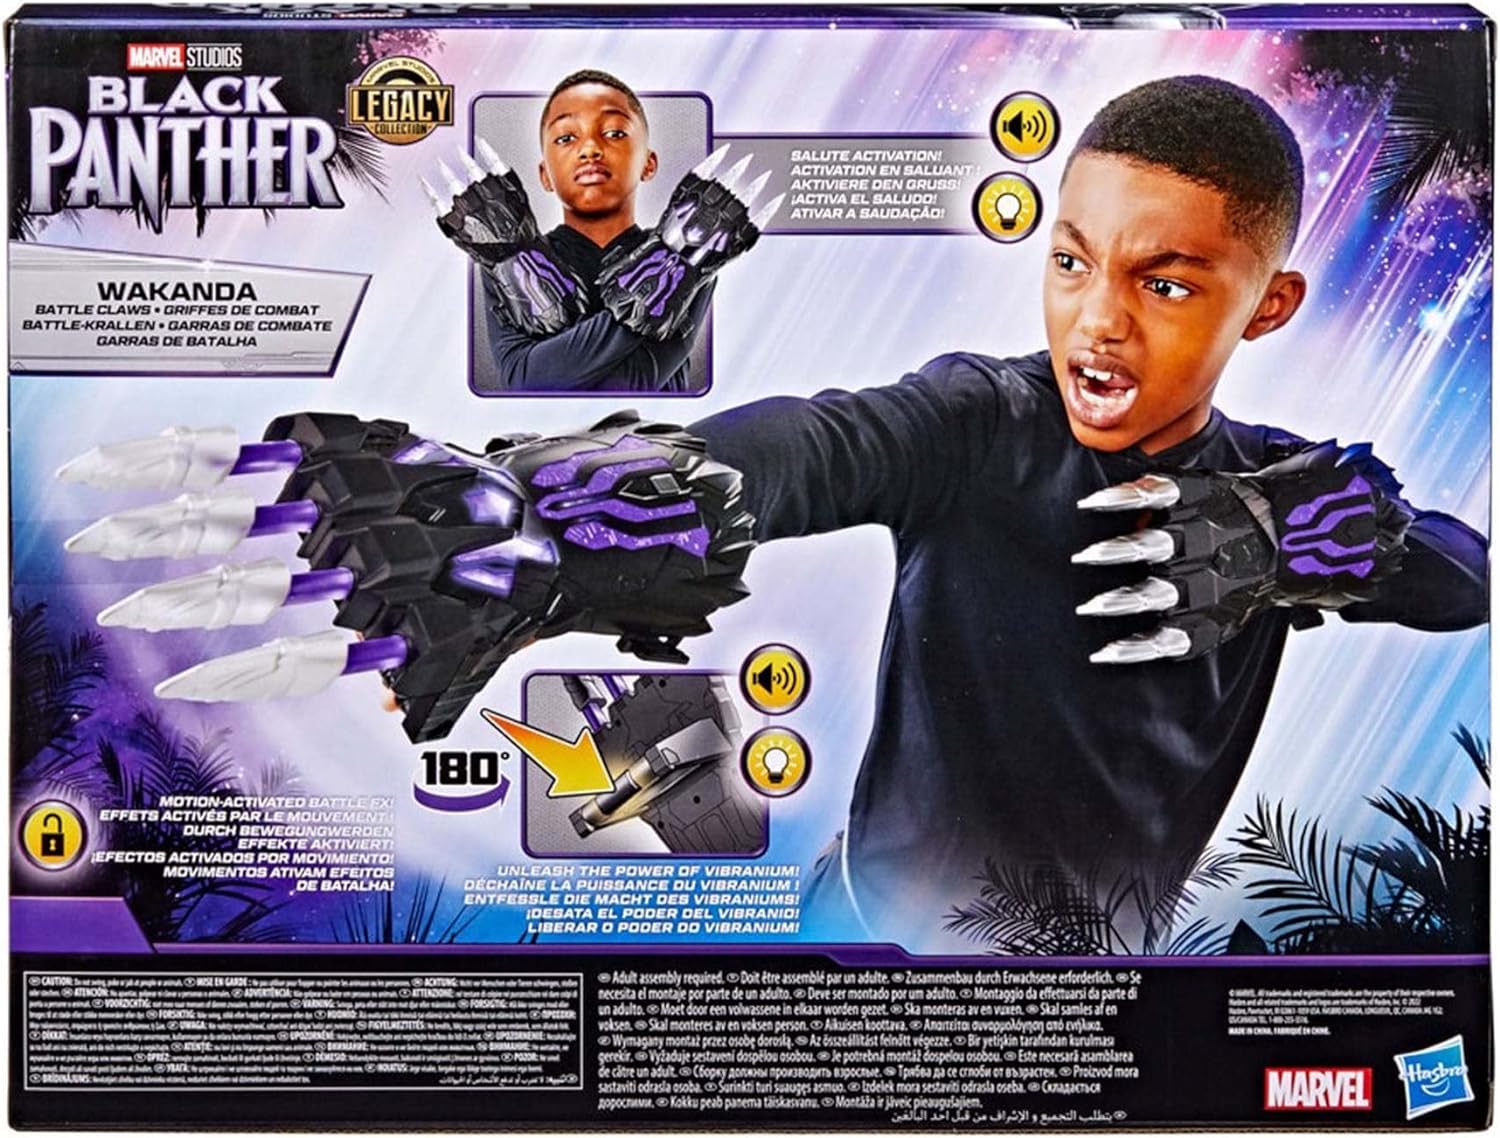 Marvel Studios' Black Panther Legacy Wakanda FX Battle Claws with Lights and Sounds, Kids Role Play Toys, Super Hero Toys for Ages 5 Up